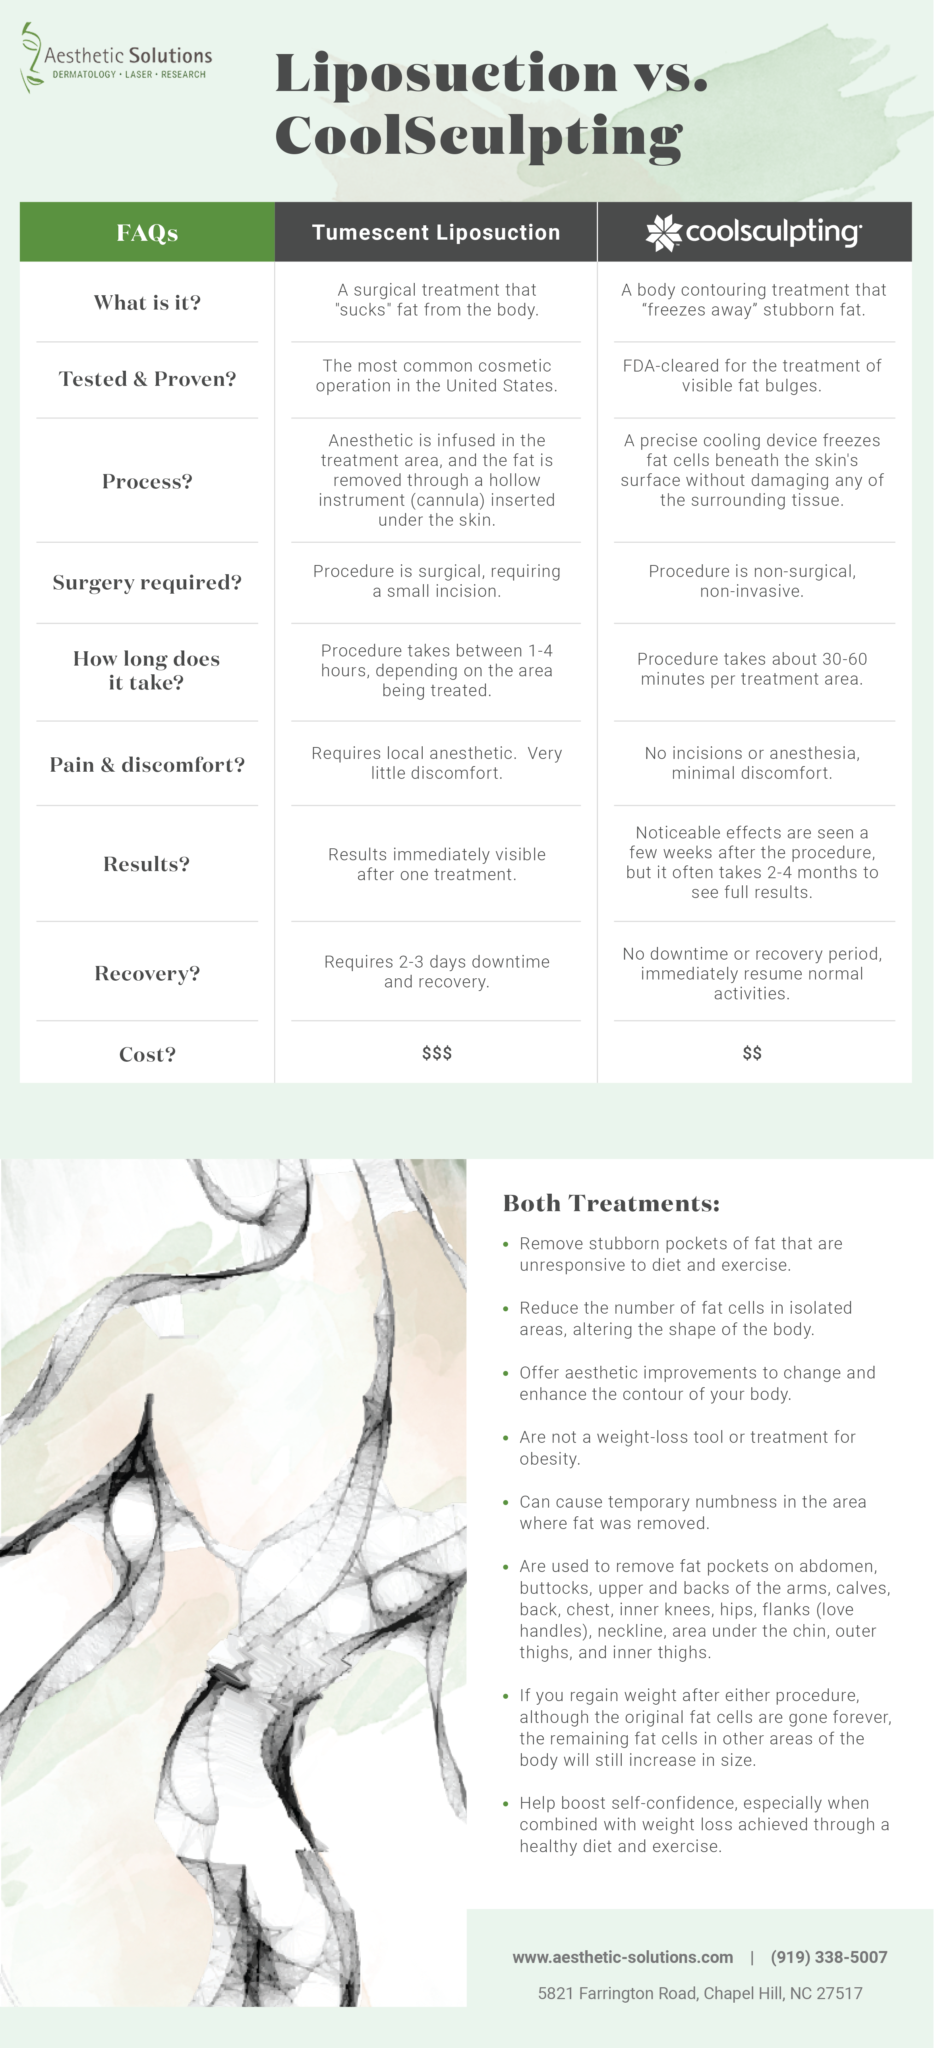 Infographic comparing liposuction and coolsculpting body contouring procedures